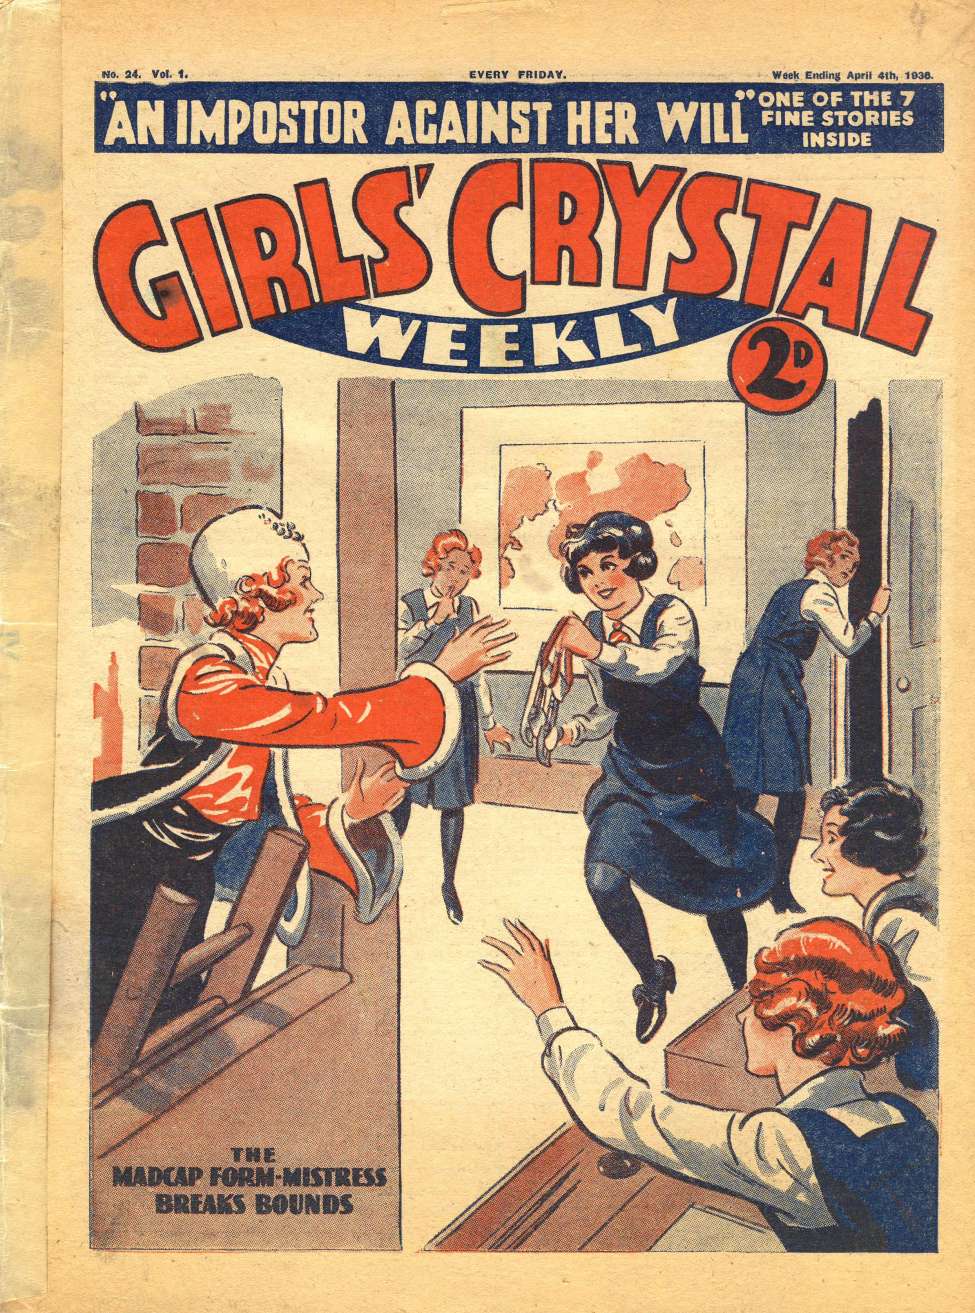 Comic Book Cover For Girls' Crystal 24 - Madcap Form-Mistress Breaks Bounds